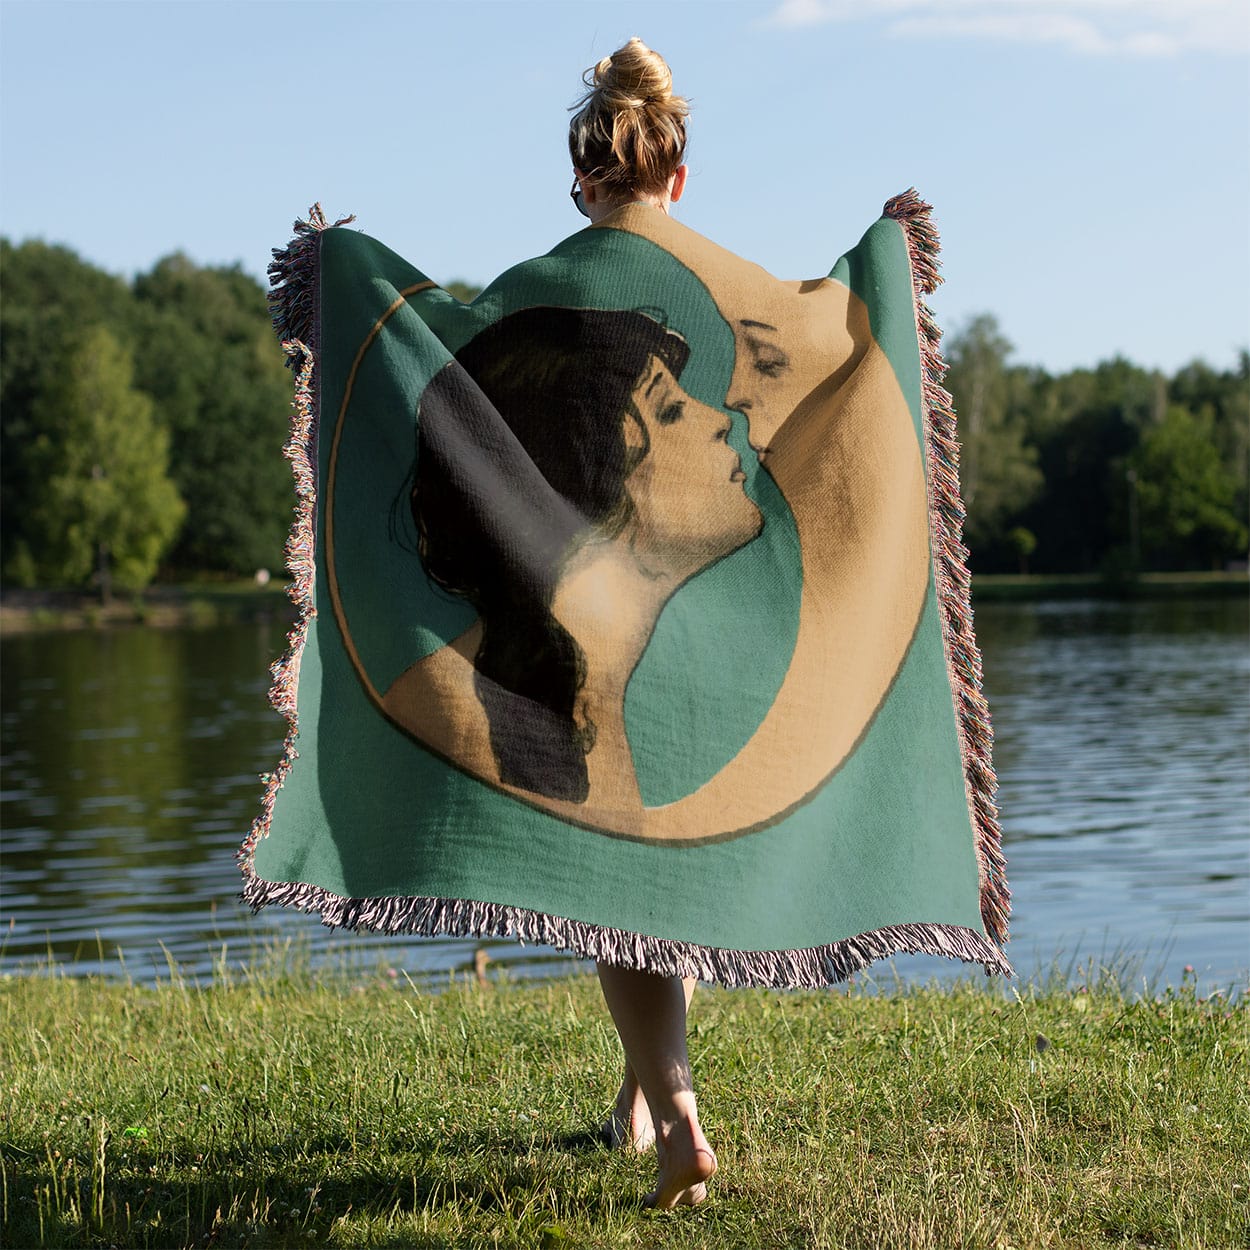 Woman Kissing the Moon Woven Blanket Held on a Woman's Back Outside